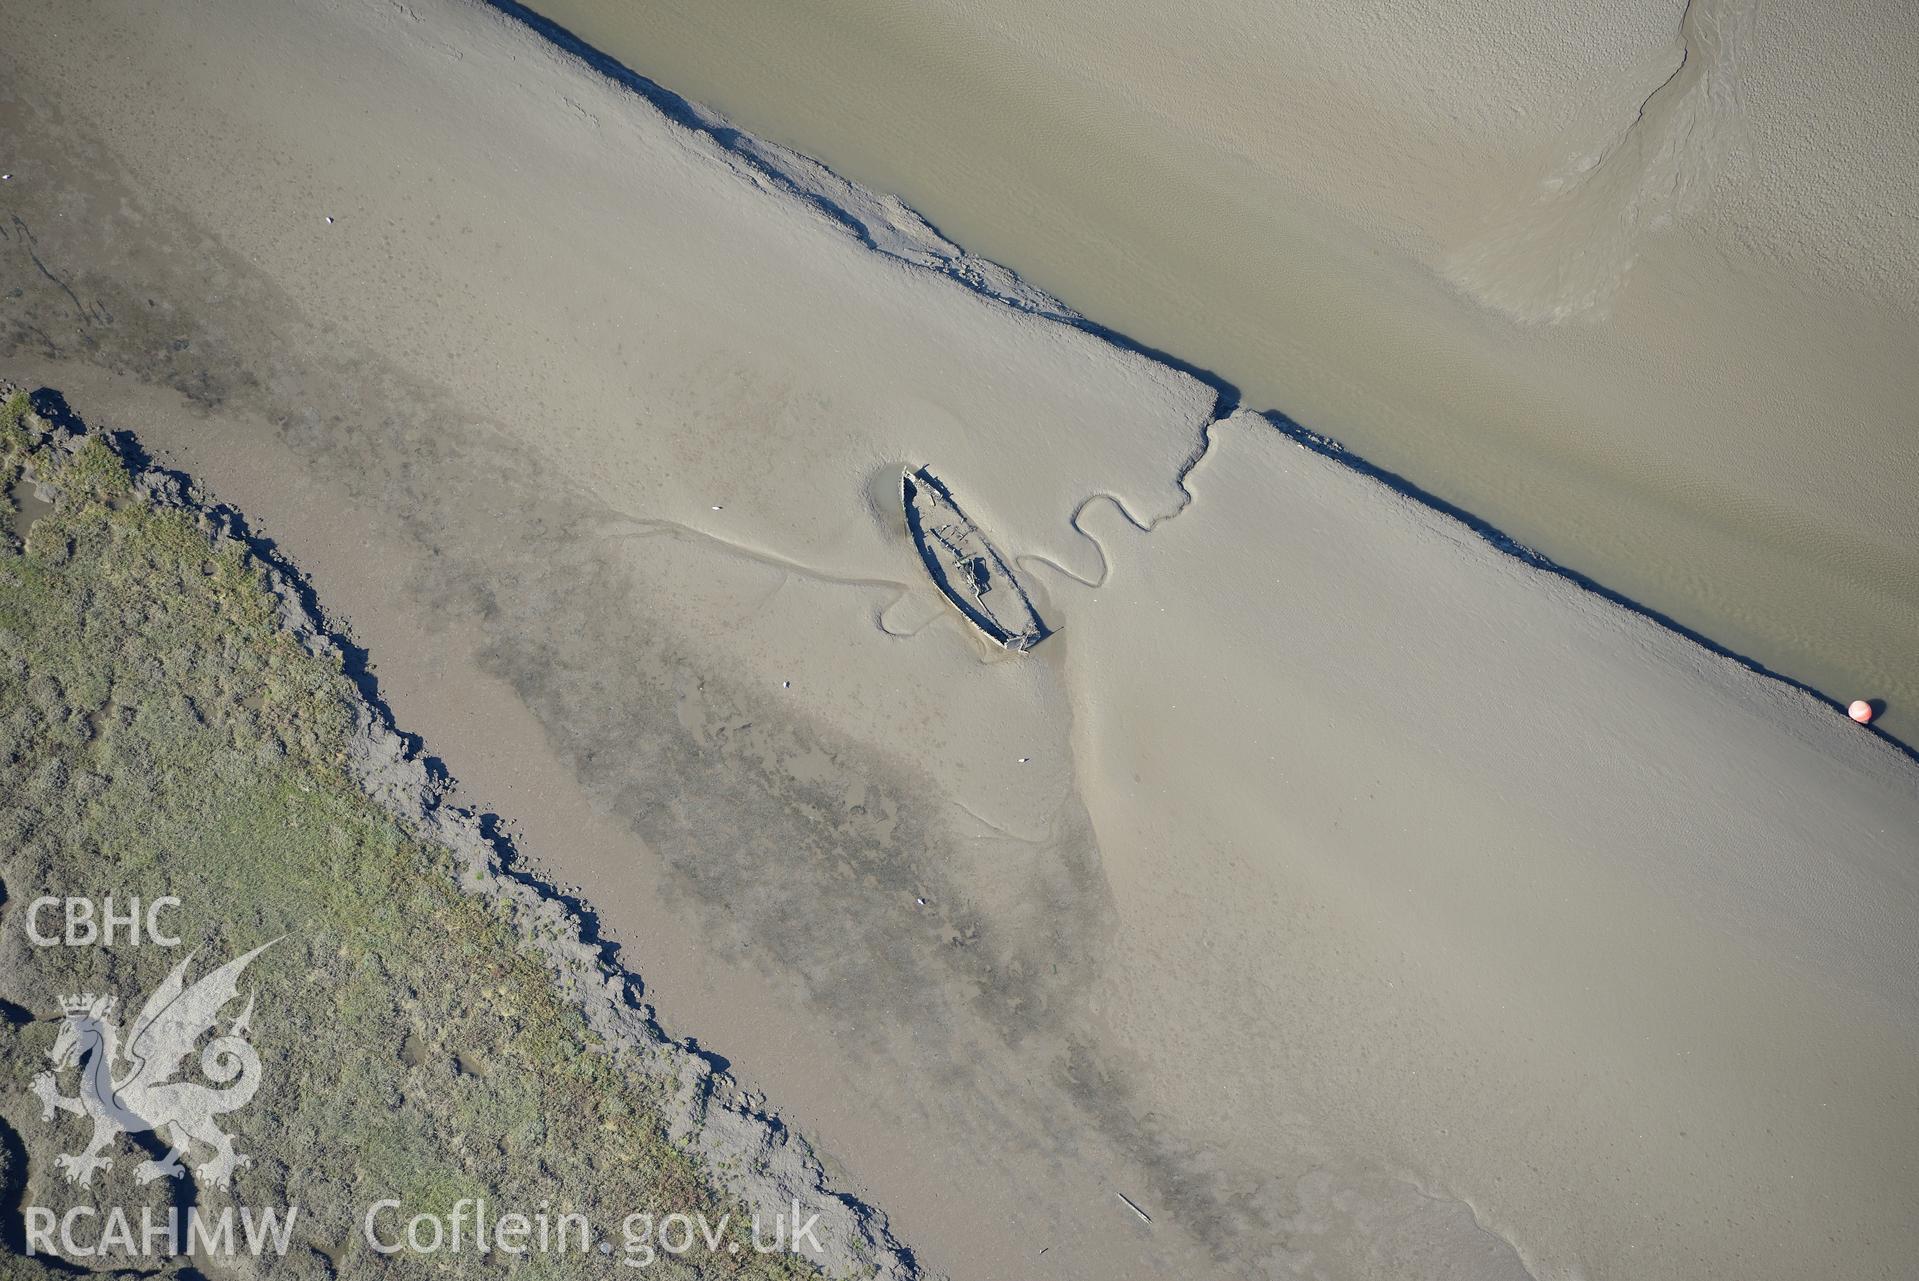 Hull or wreck off the northern coast of the Gower Peninsula, near Penclawdd. Oblique aerial photograph taken during the Royal Commission's programme of archaeological aerial reconnaissance by Toby Driver on 30th September 2015.